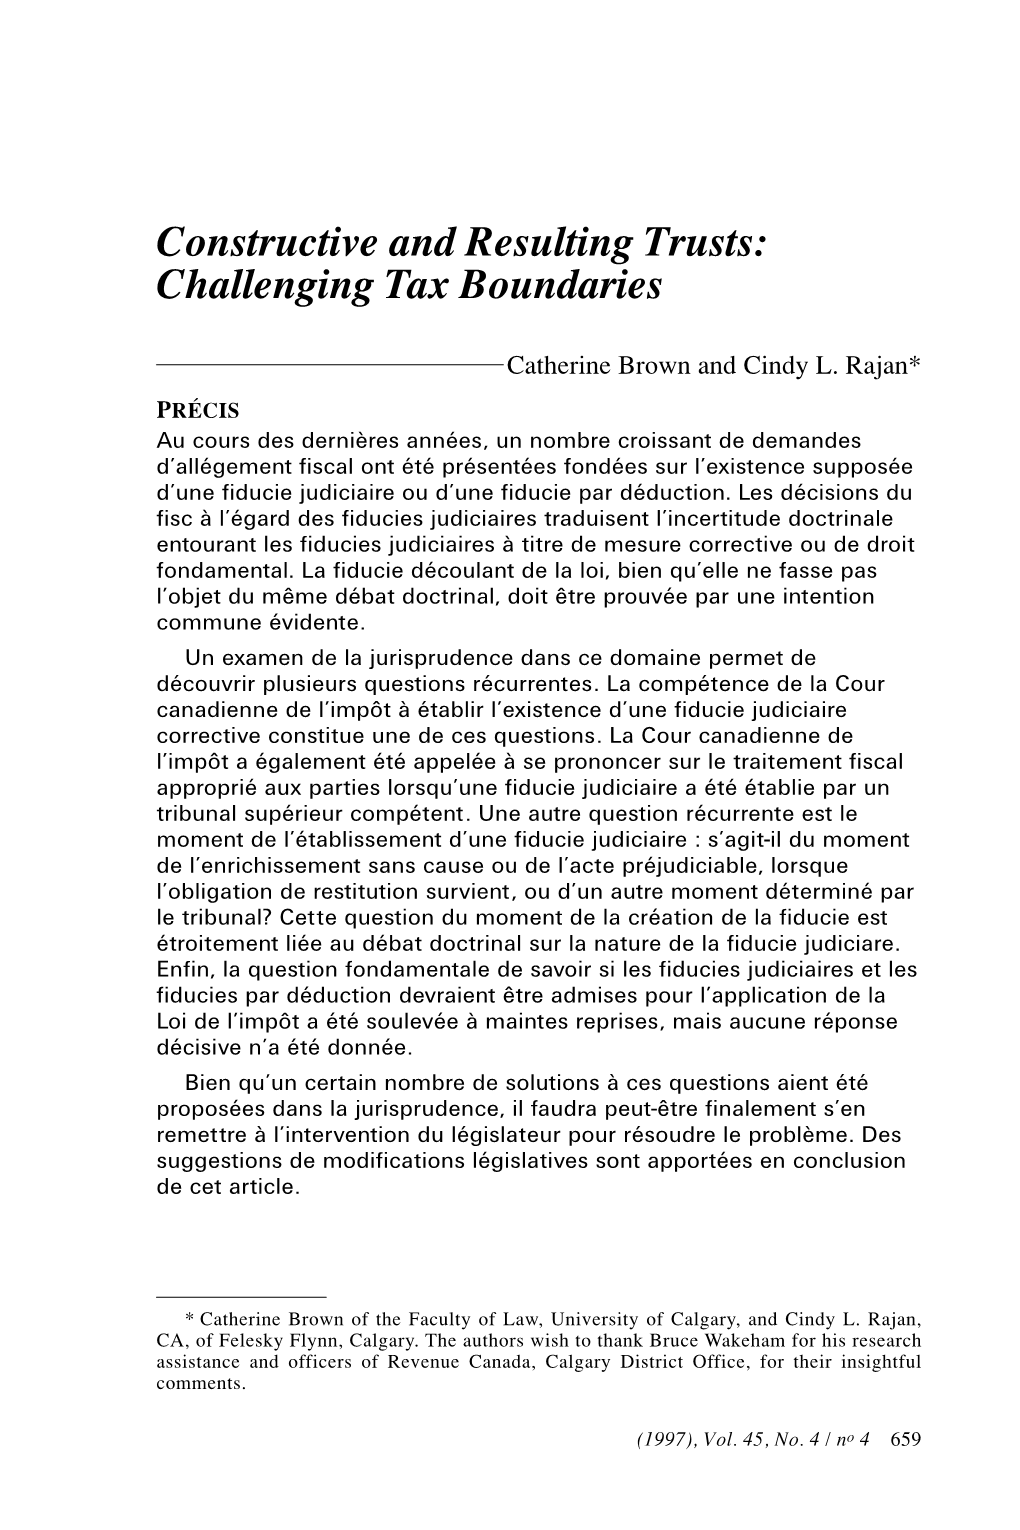 Constructive and Resulting Trusts: Challenging Tax Boundaries